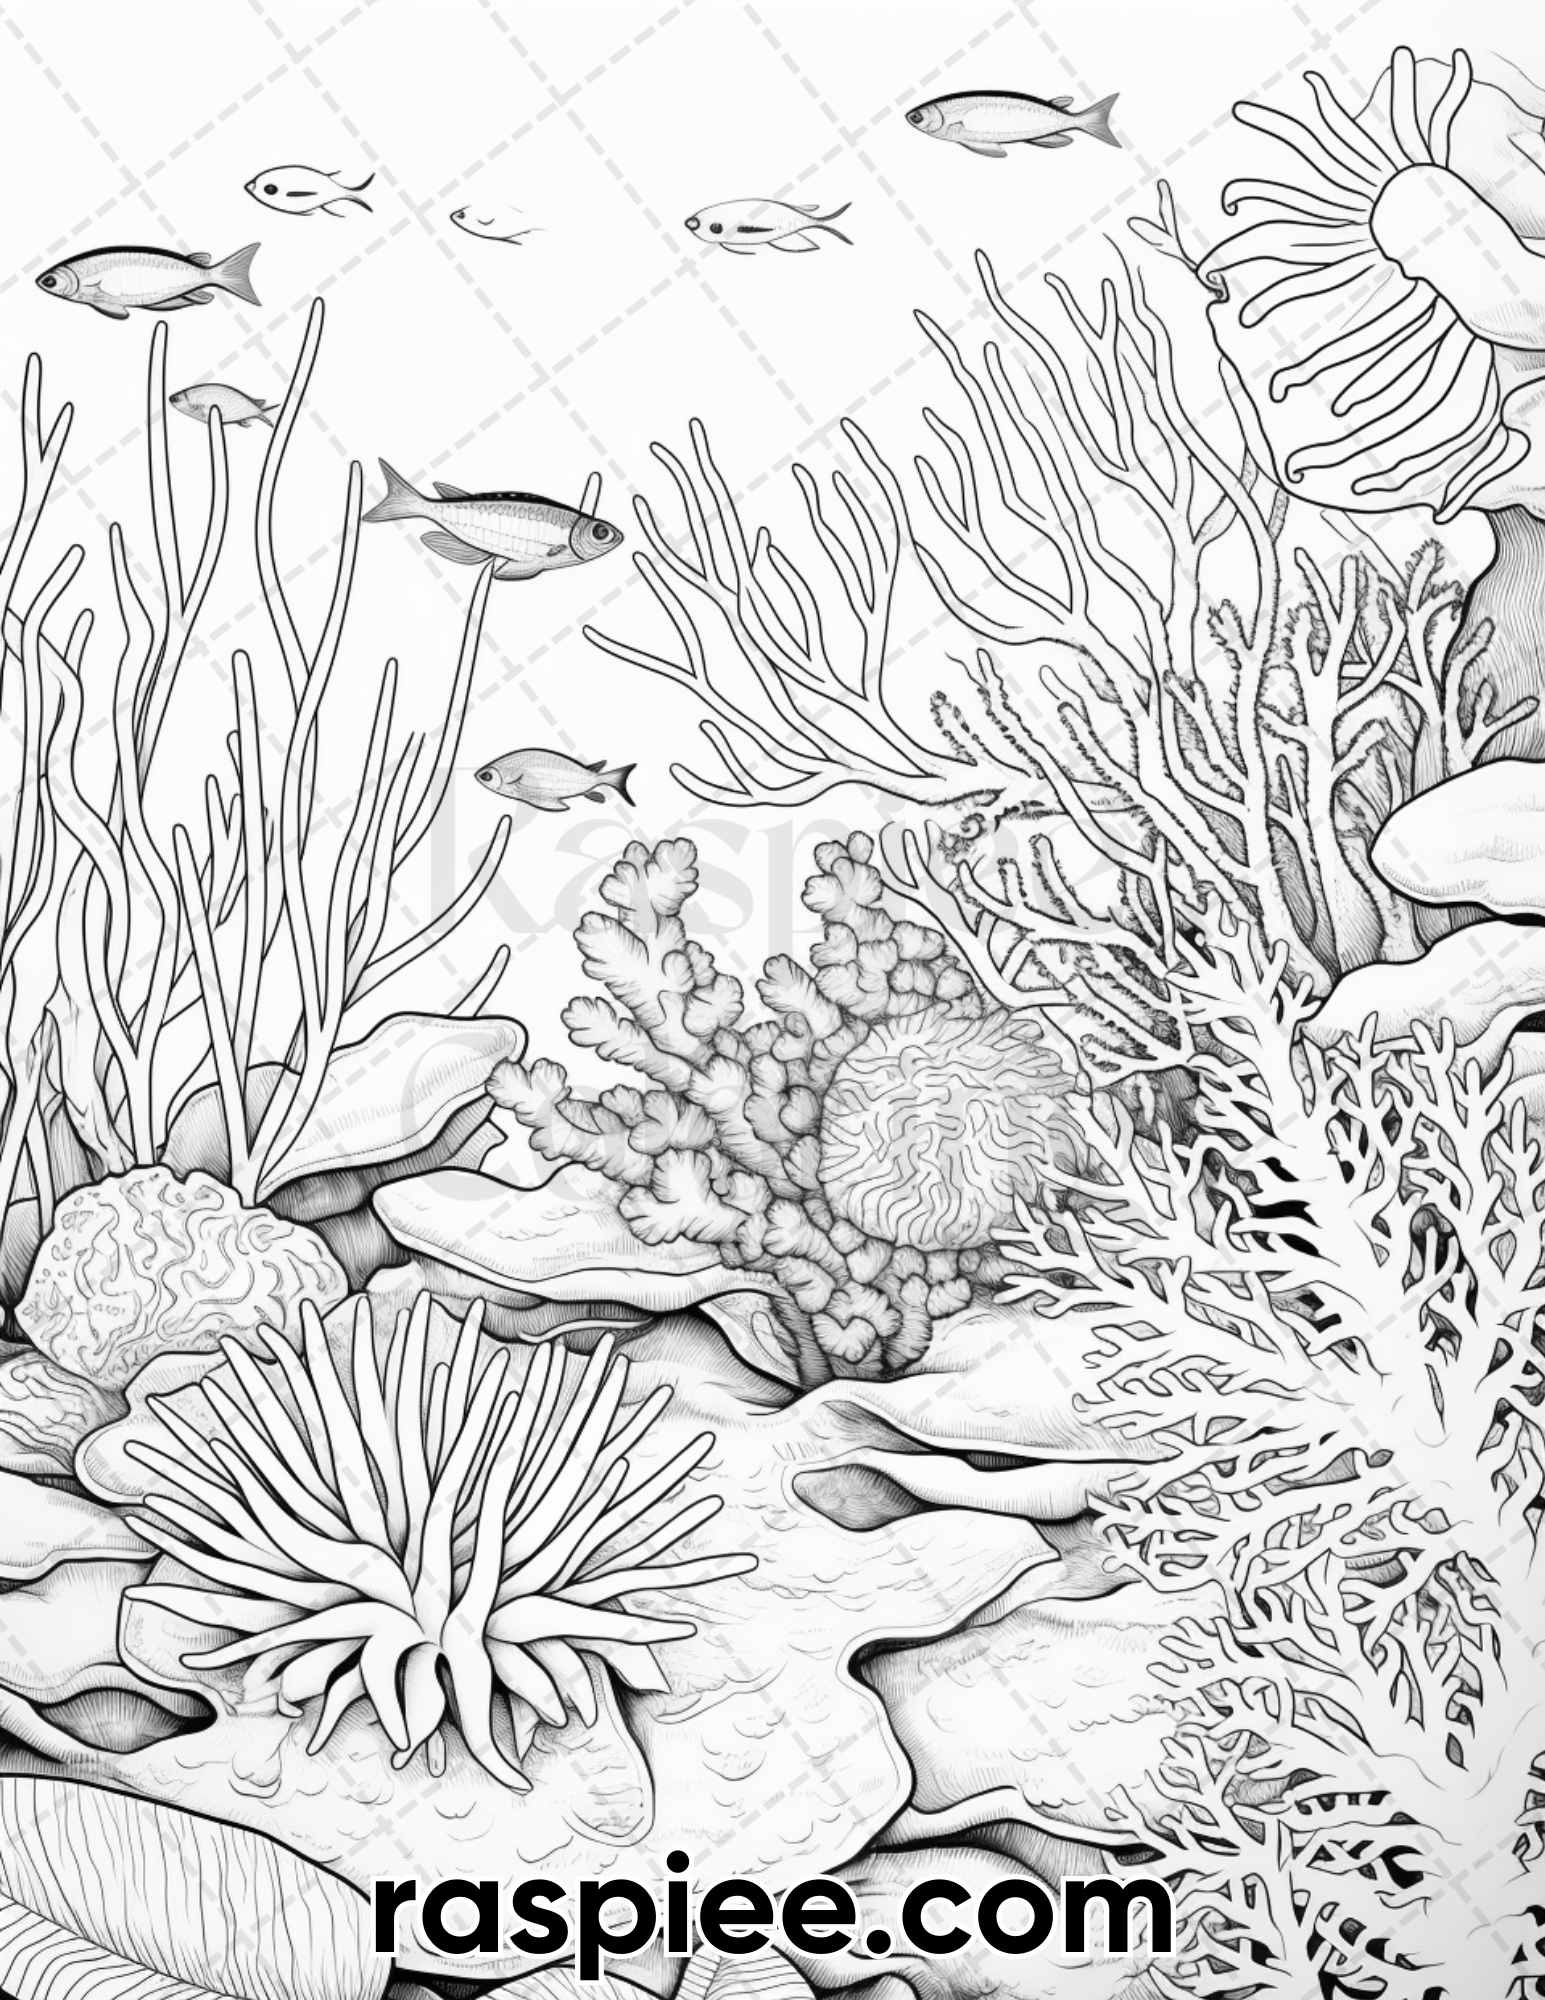 Colorful coral garden grayscale adult coloring pages printable pdf â coloring